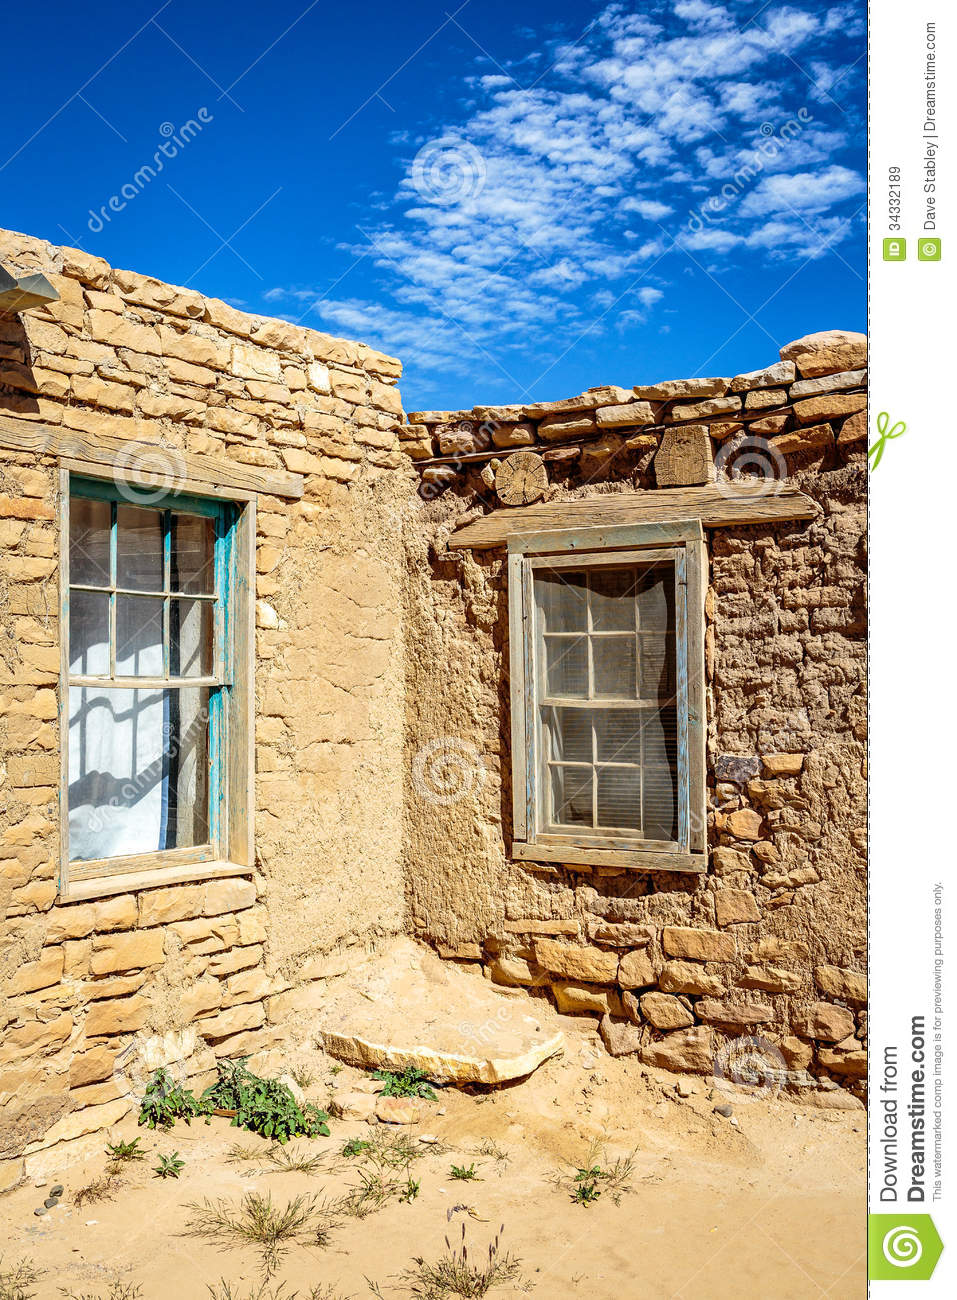 Adobe Mud And Brick Houses Sit High Atop A Mesa On The Indian